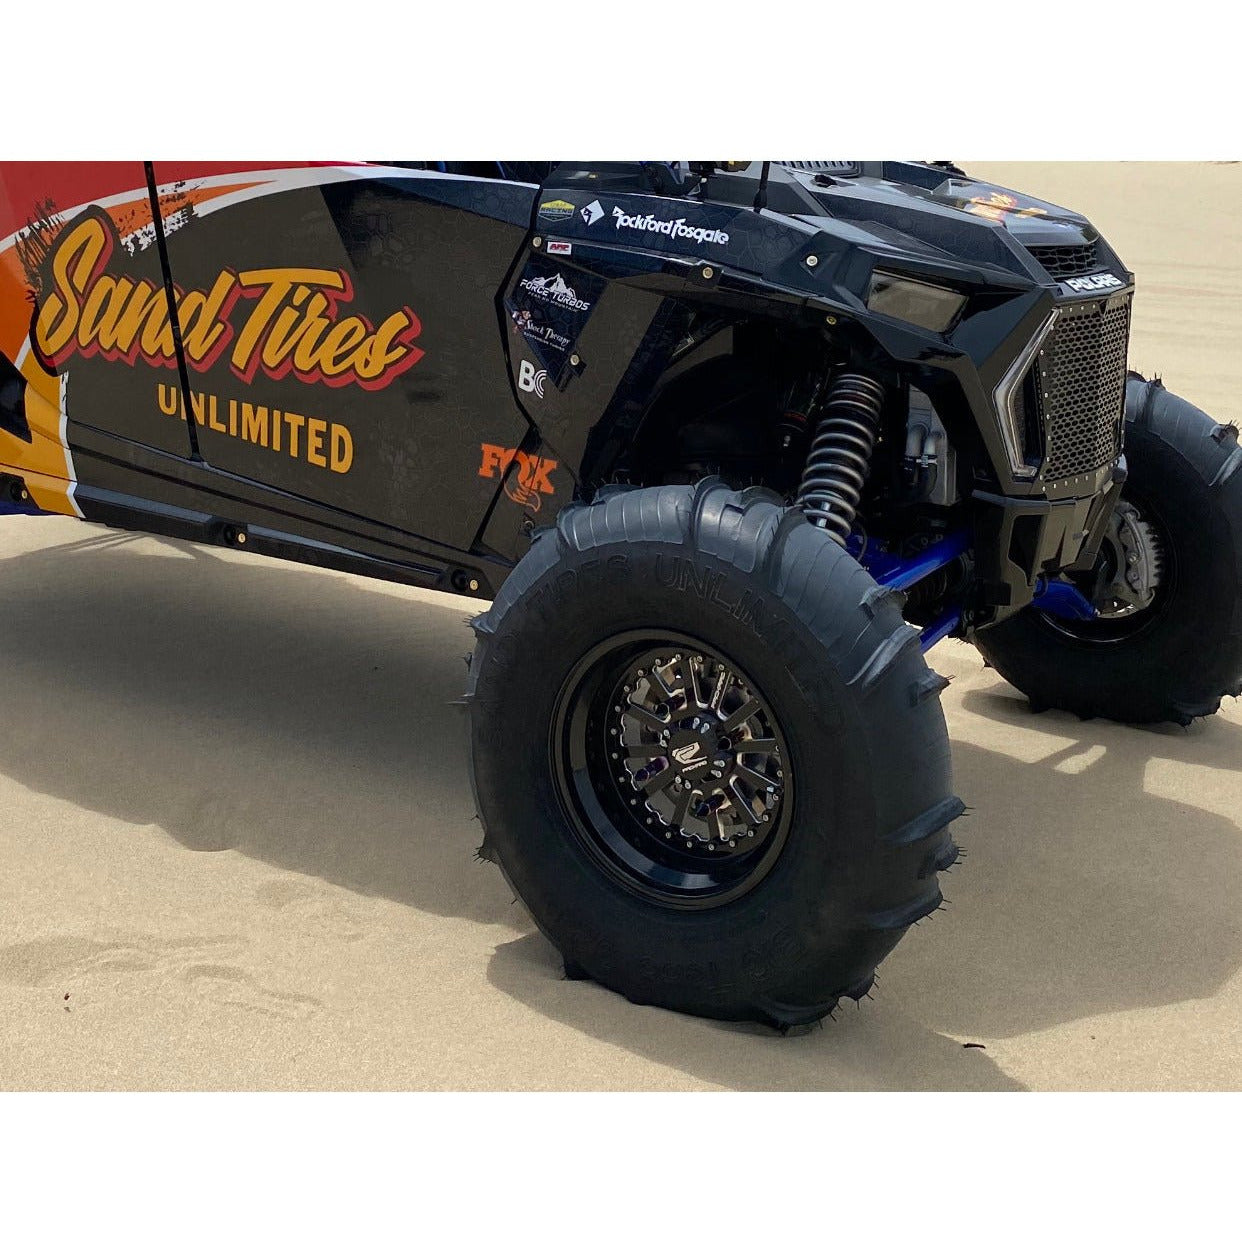 Big Tebo Front Sand Tire